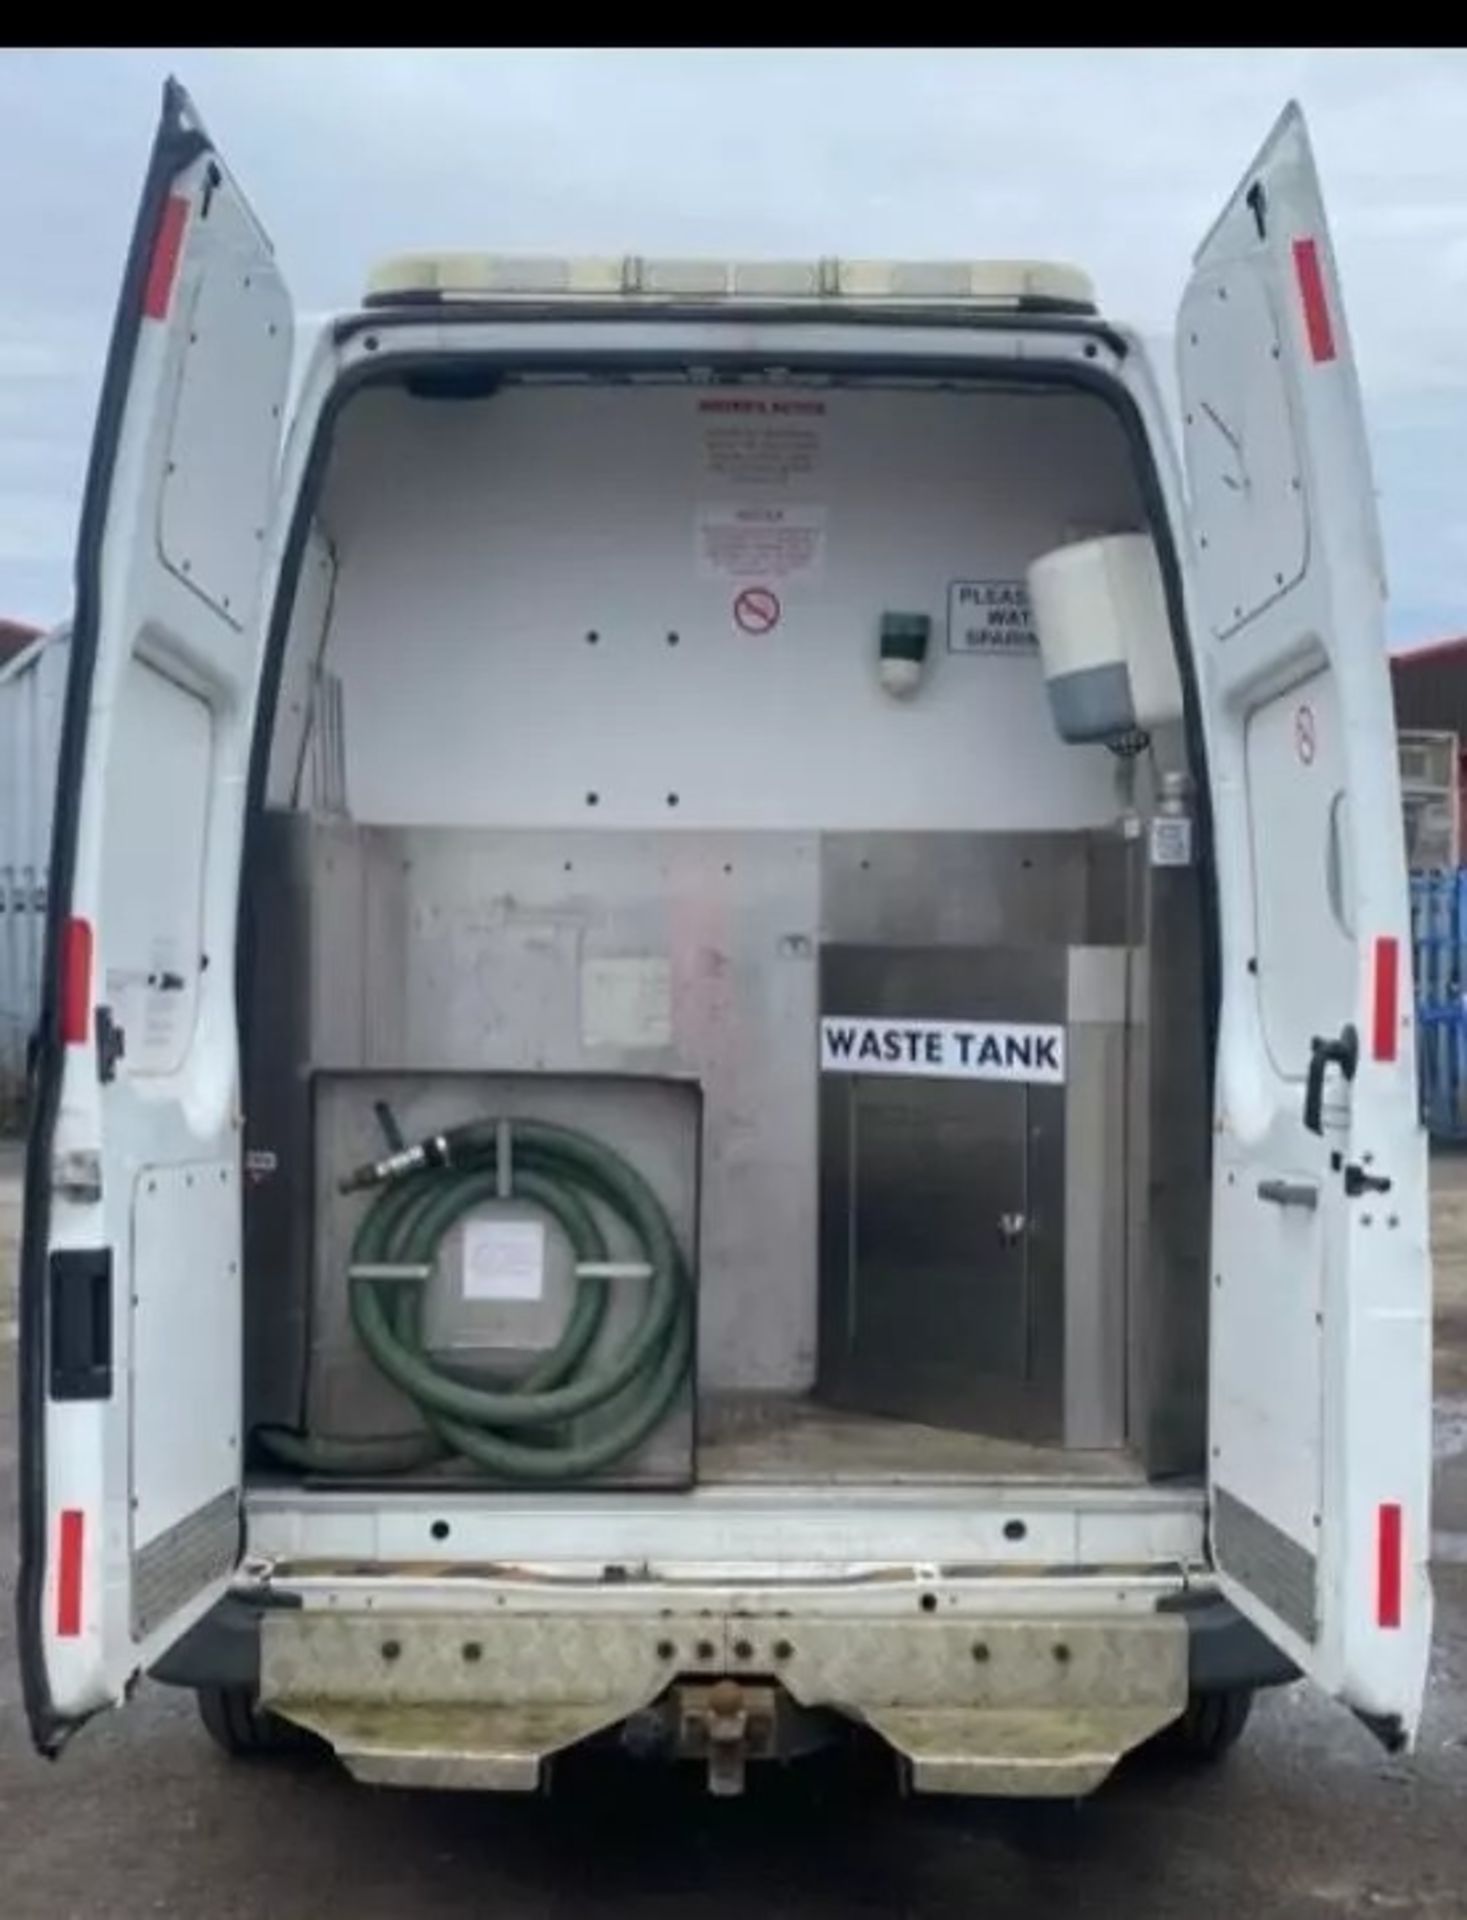 2010 FORD TRANSIT T350 LWB WELFARE UNIT - IDEAL SOLUTION FOR MOBILE FACILITIES - Image 8 of 9